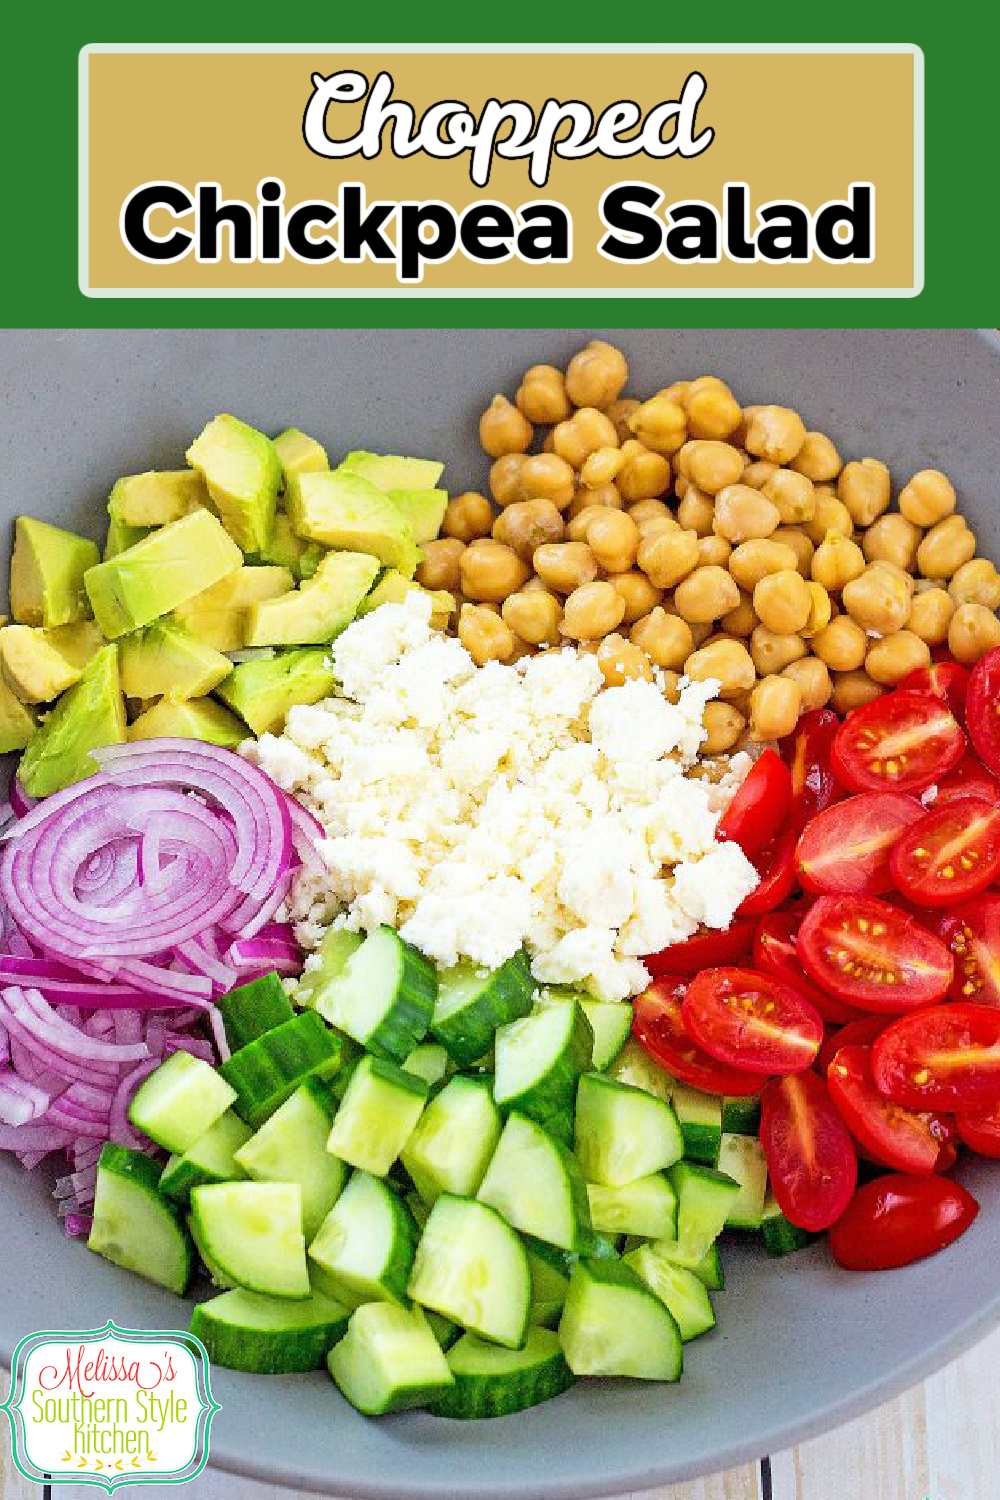 This fresh veggie filled Chopped Chickpea Salad with Avocado can be served as side dish or a light meal. #chickpeas #chickpeasalad #saladrecipes #healthysalads #healthyrecipes #vegetarian #avocadorecipes #southernsides #southernrecipes #picnicsides via @melissasssk